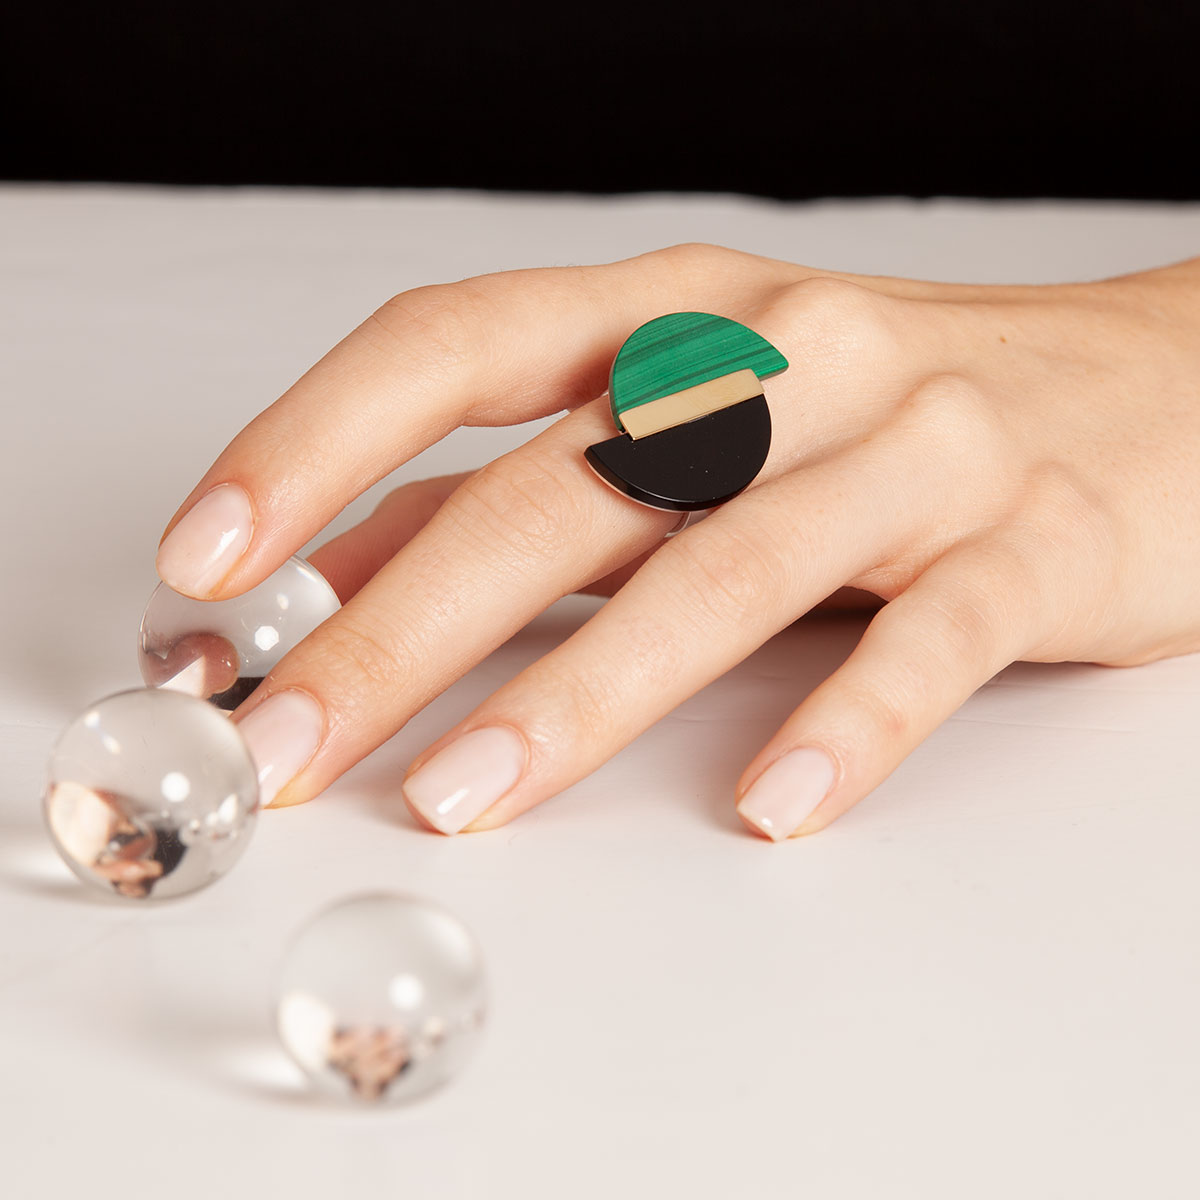 Taz handmade ring in 9k or 18k gold, sterling silver, onyx and malachite designed by Belen Bajo m3